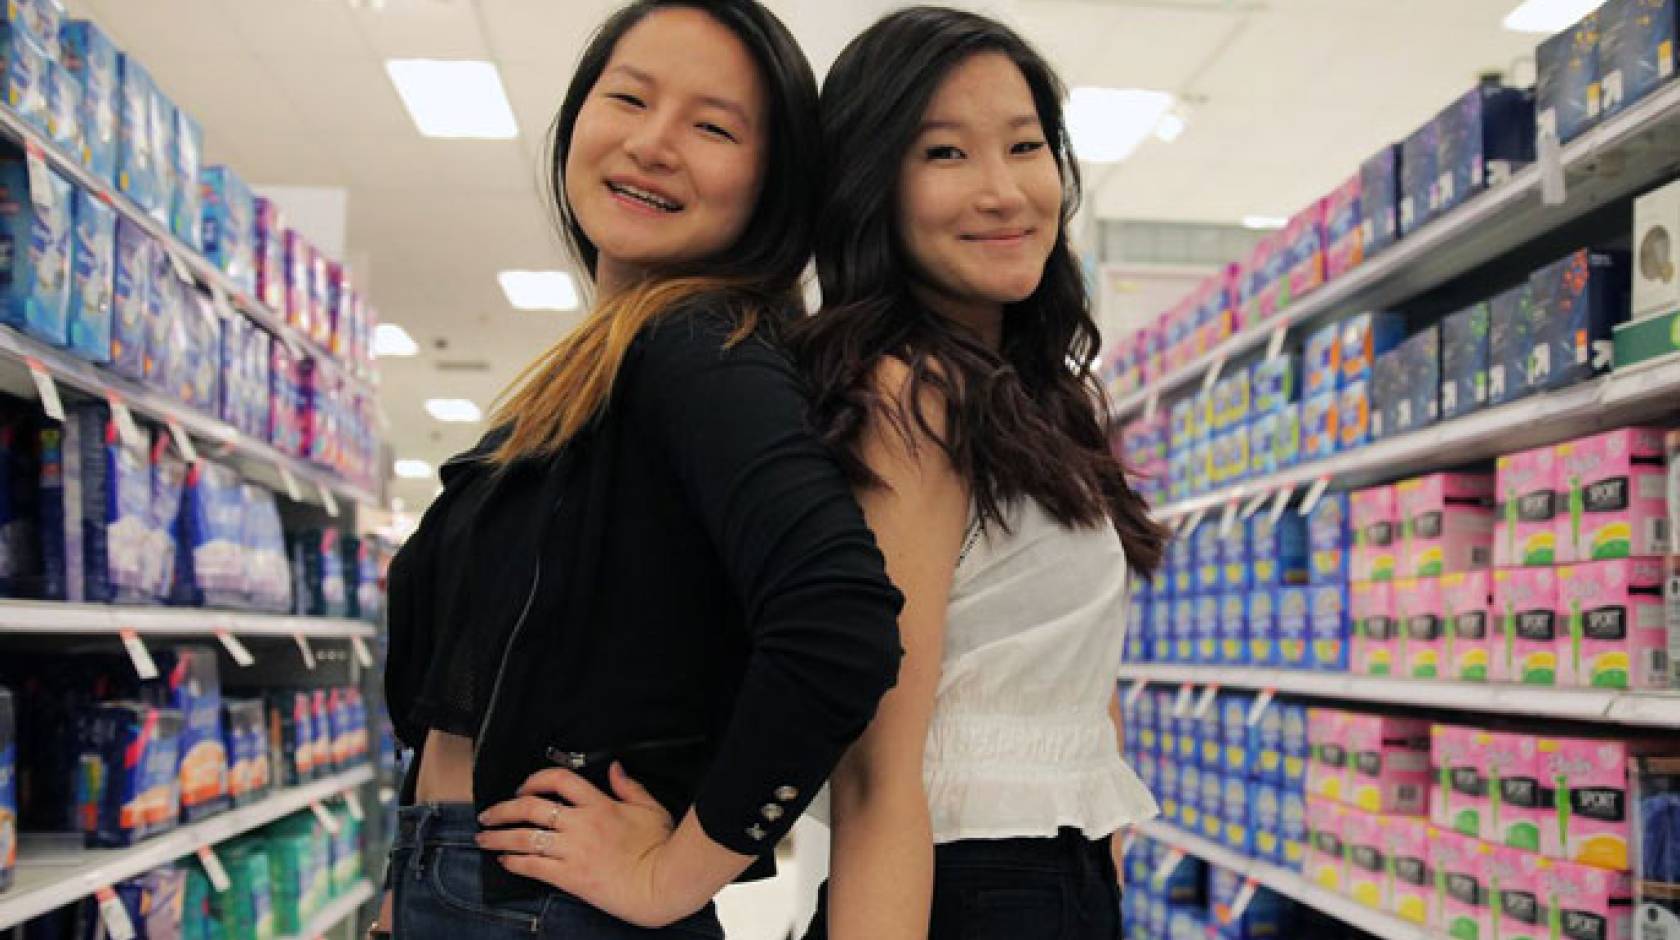 Lee sisters pose together in the feminine products aisle of a store